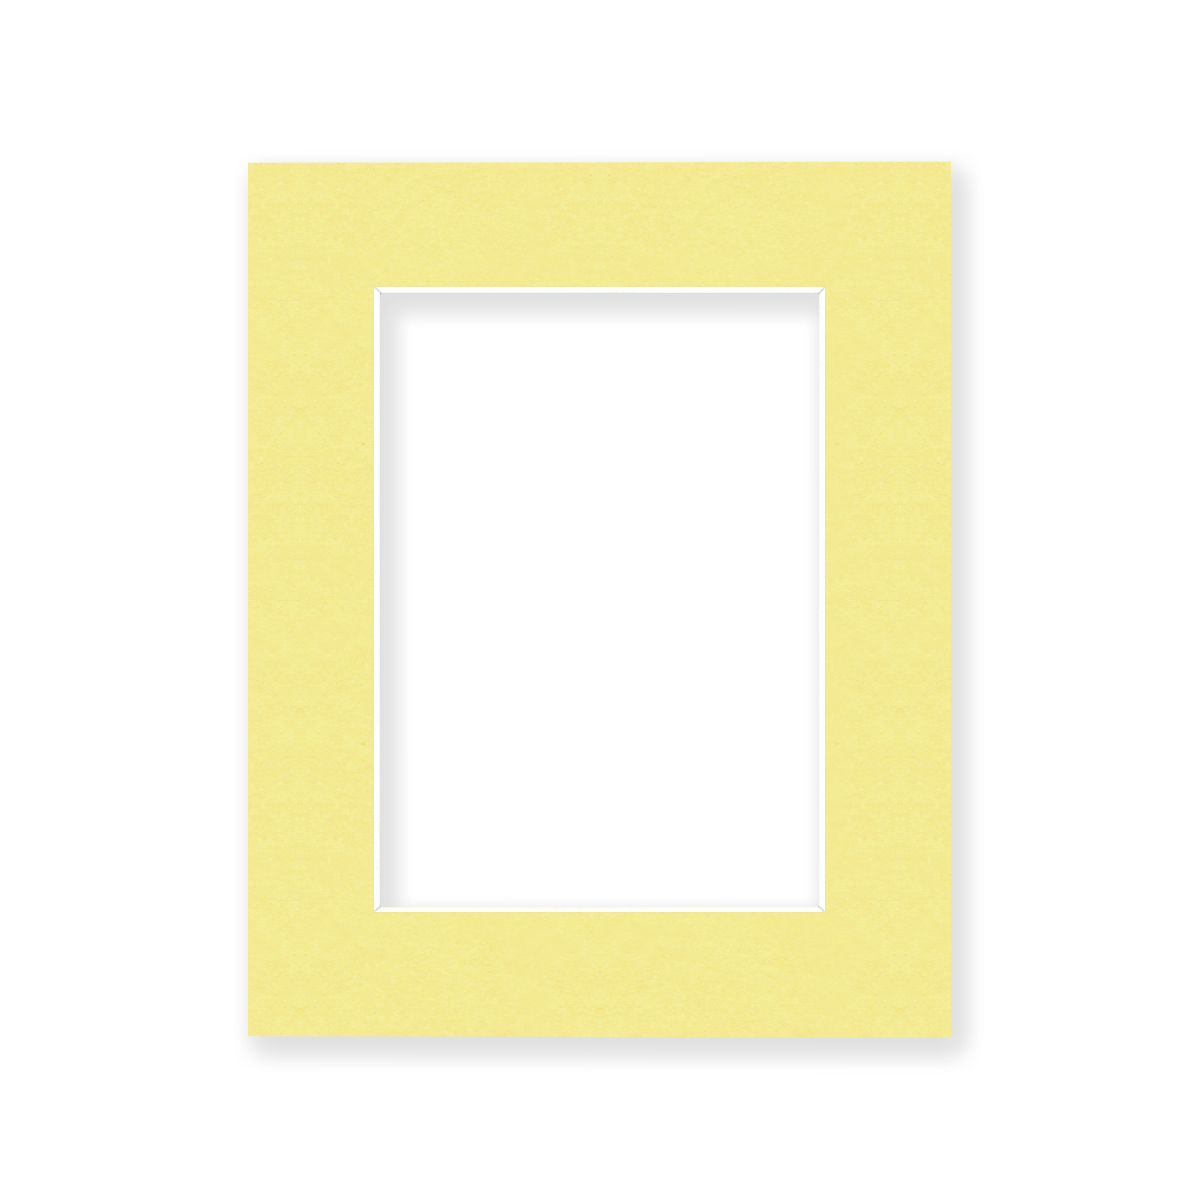 8x10 Mat for 5x7 Photo - Soft Yellow Matboard for Frames Measuring 8 x 10 Inches - to Display Art Measuring 5 x 7 Inches